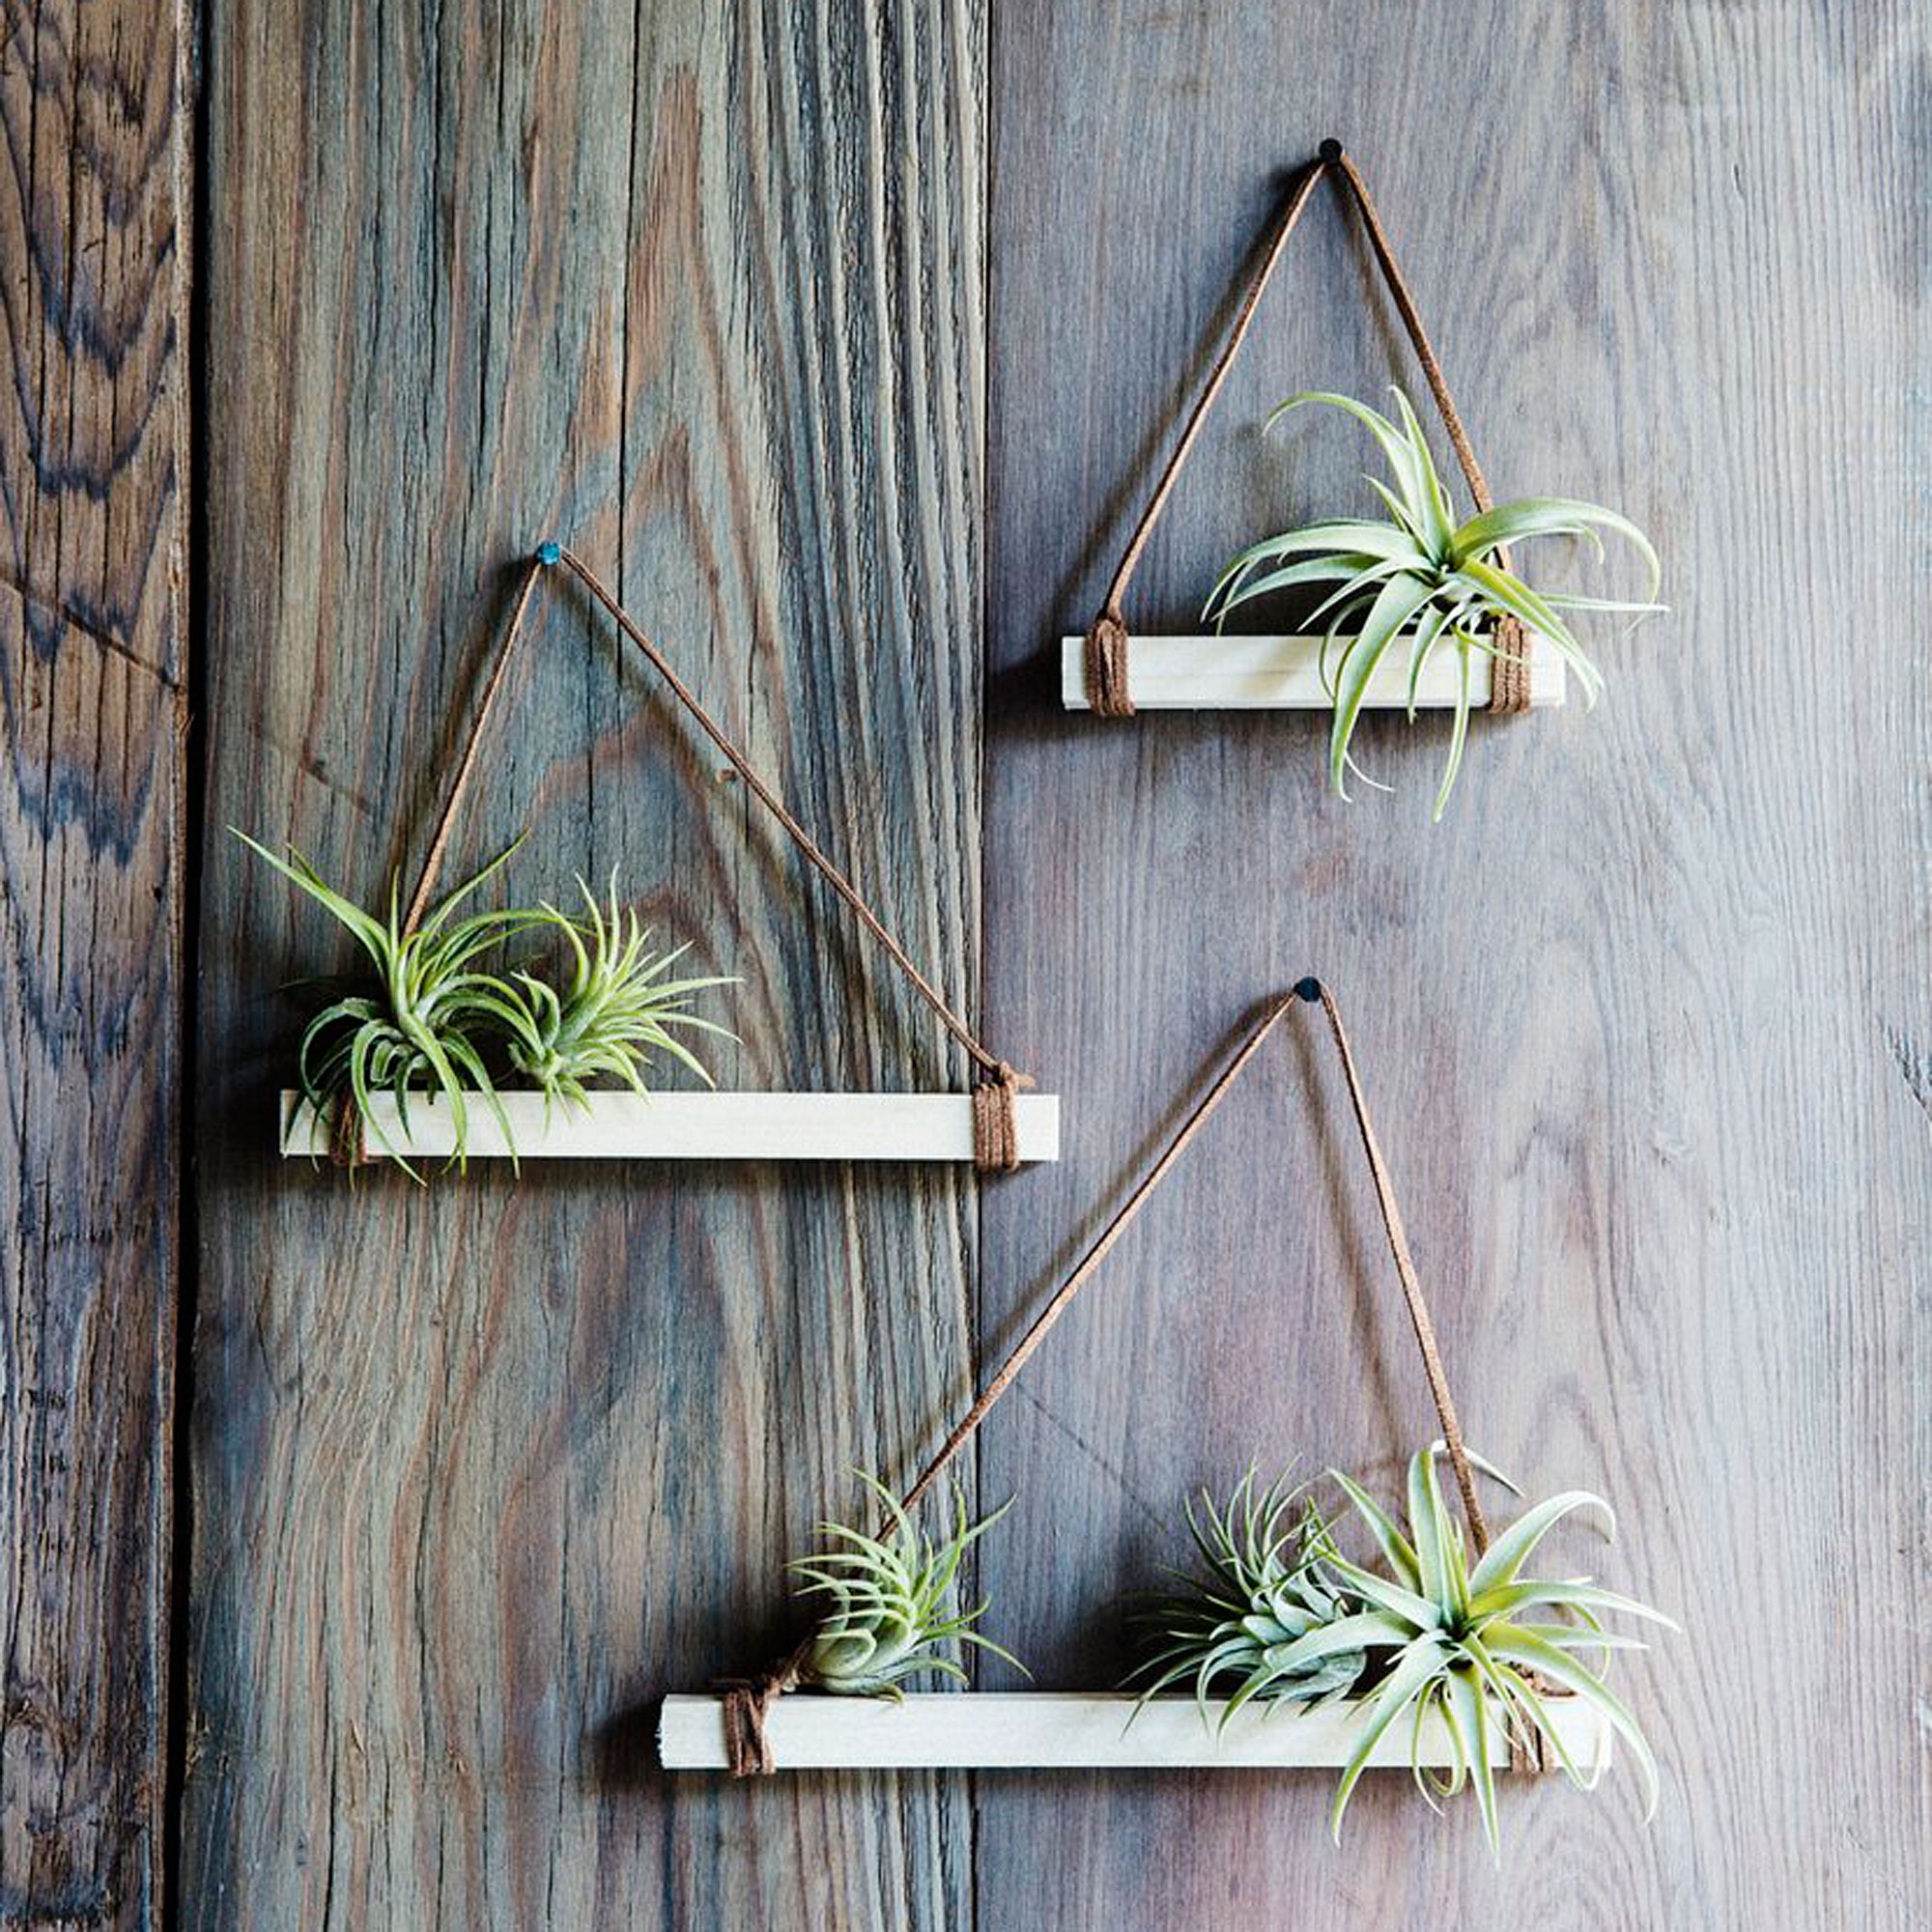 10 Ways to Decorate with Air Plants